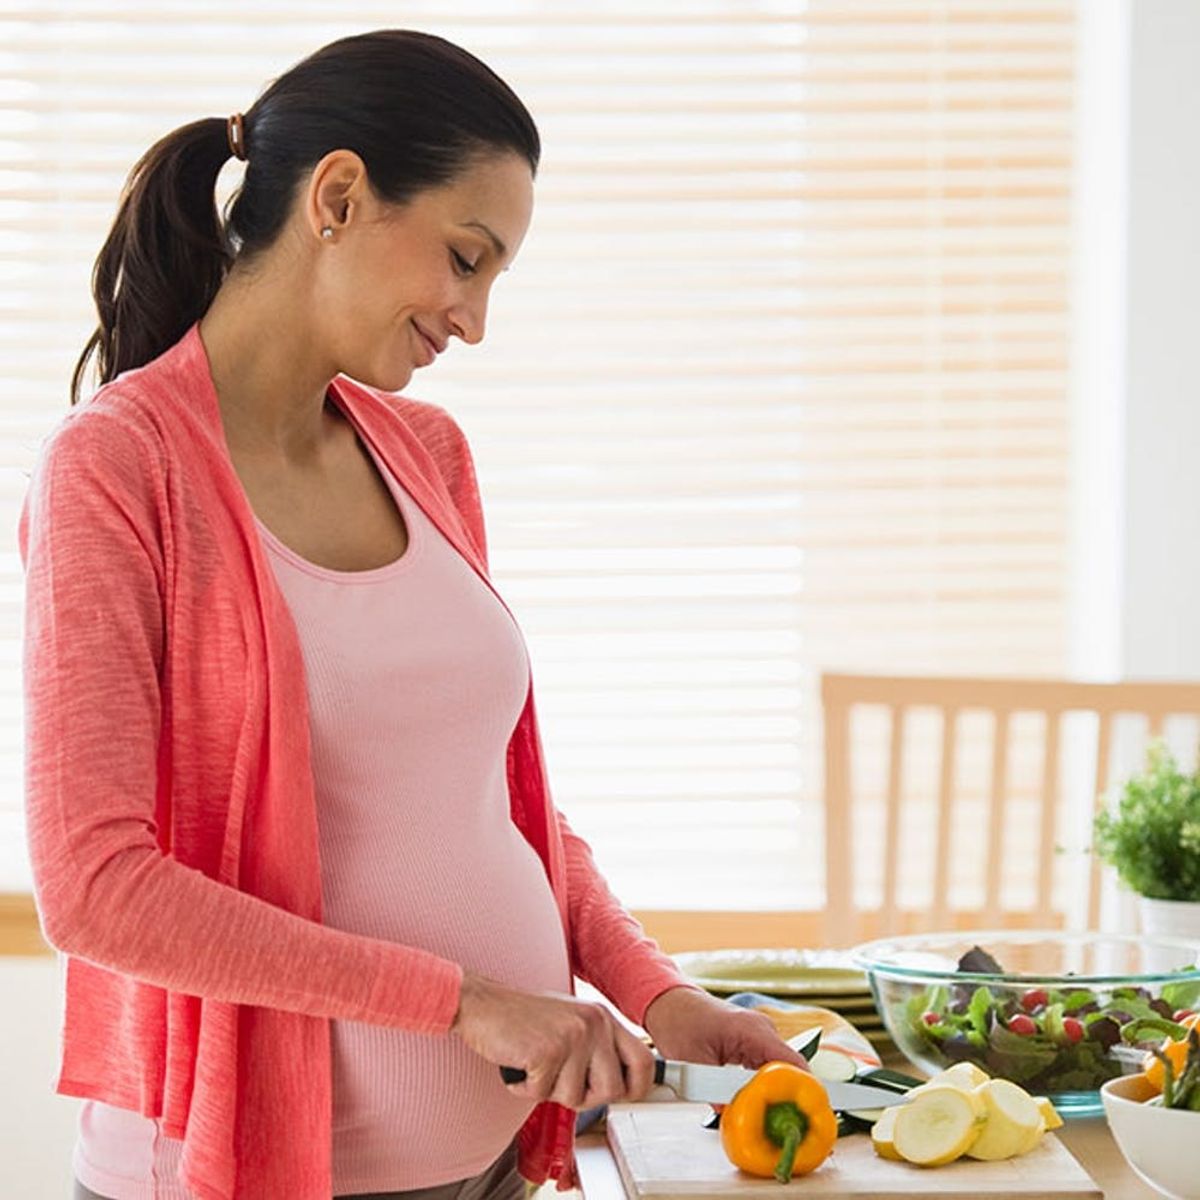 Here’s How Your Diet Can Affect Your Fertility